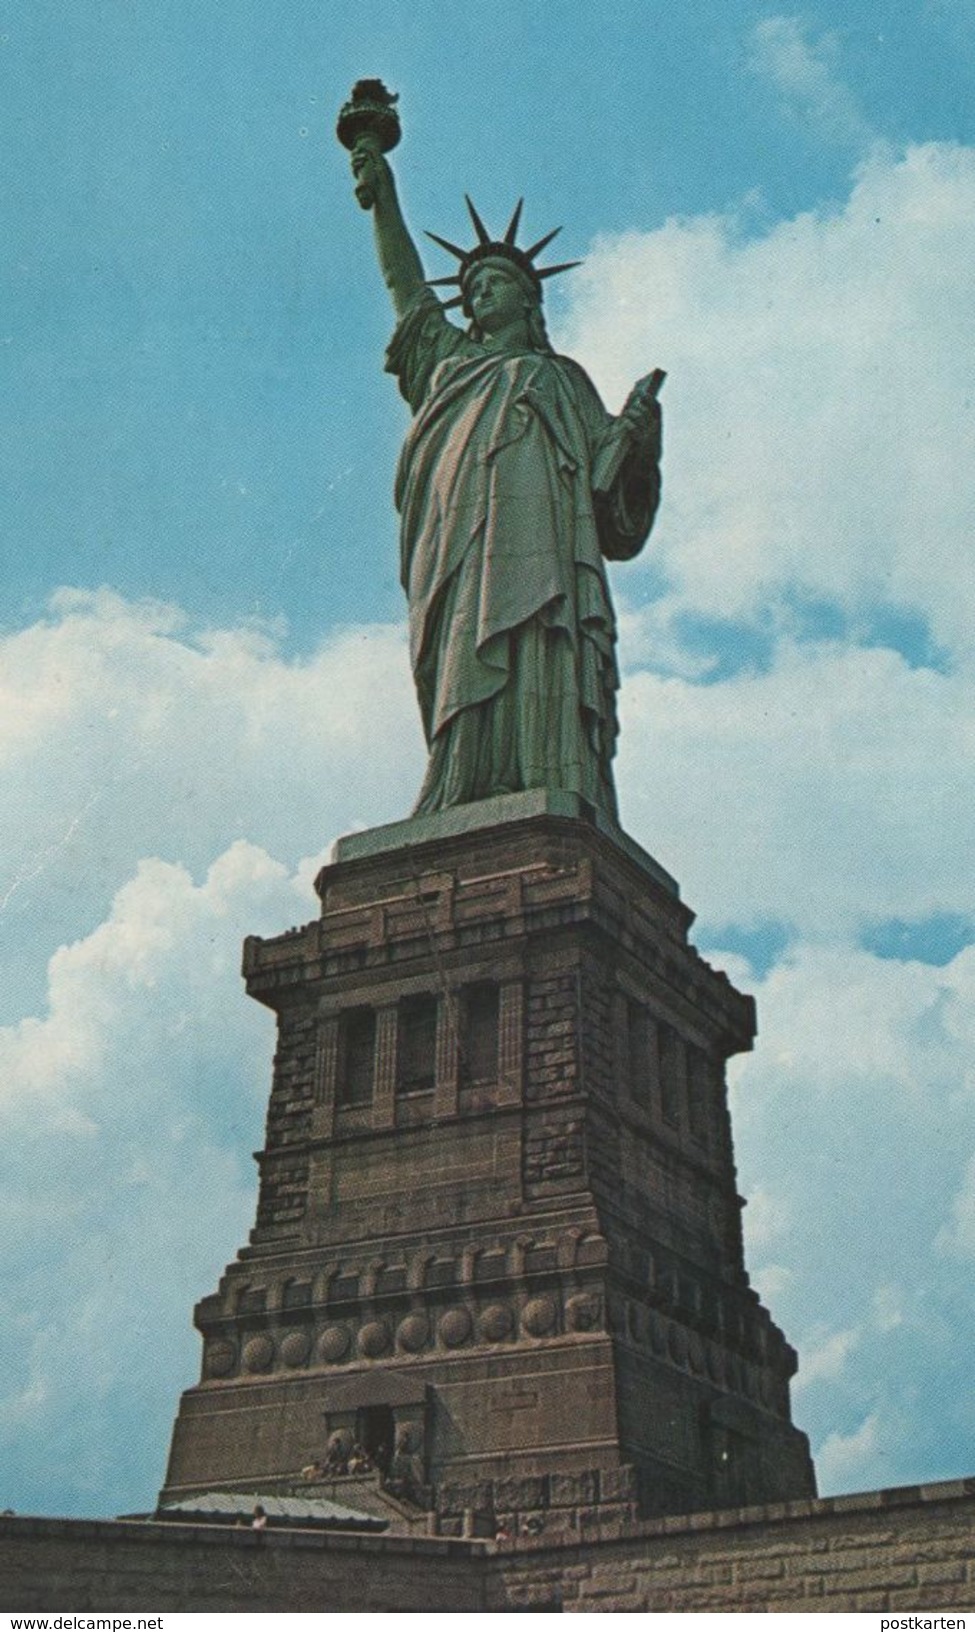 ÄLTERE POSTKARTE THE STATUE OF LIBERTY NEW YORK CITY UNVEILED IN OCTOBER 1886 Ansichtskarte Postcard Cpa AK - Statue Of Liberty